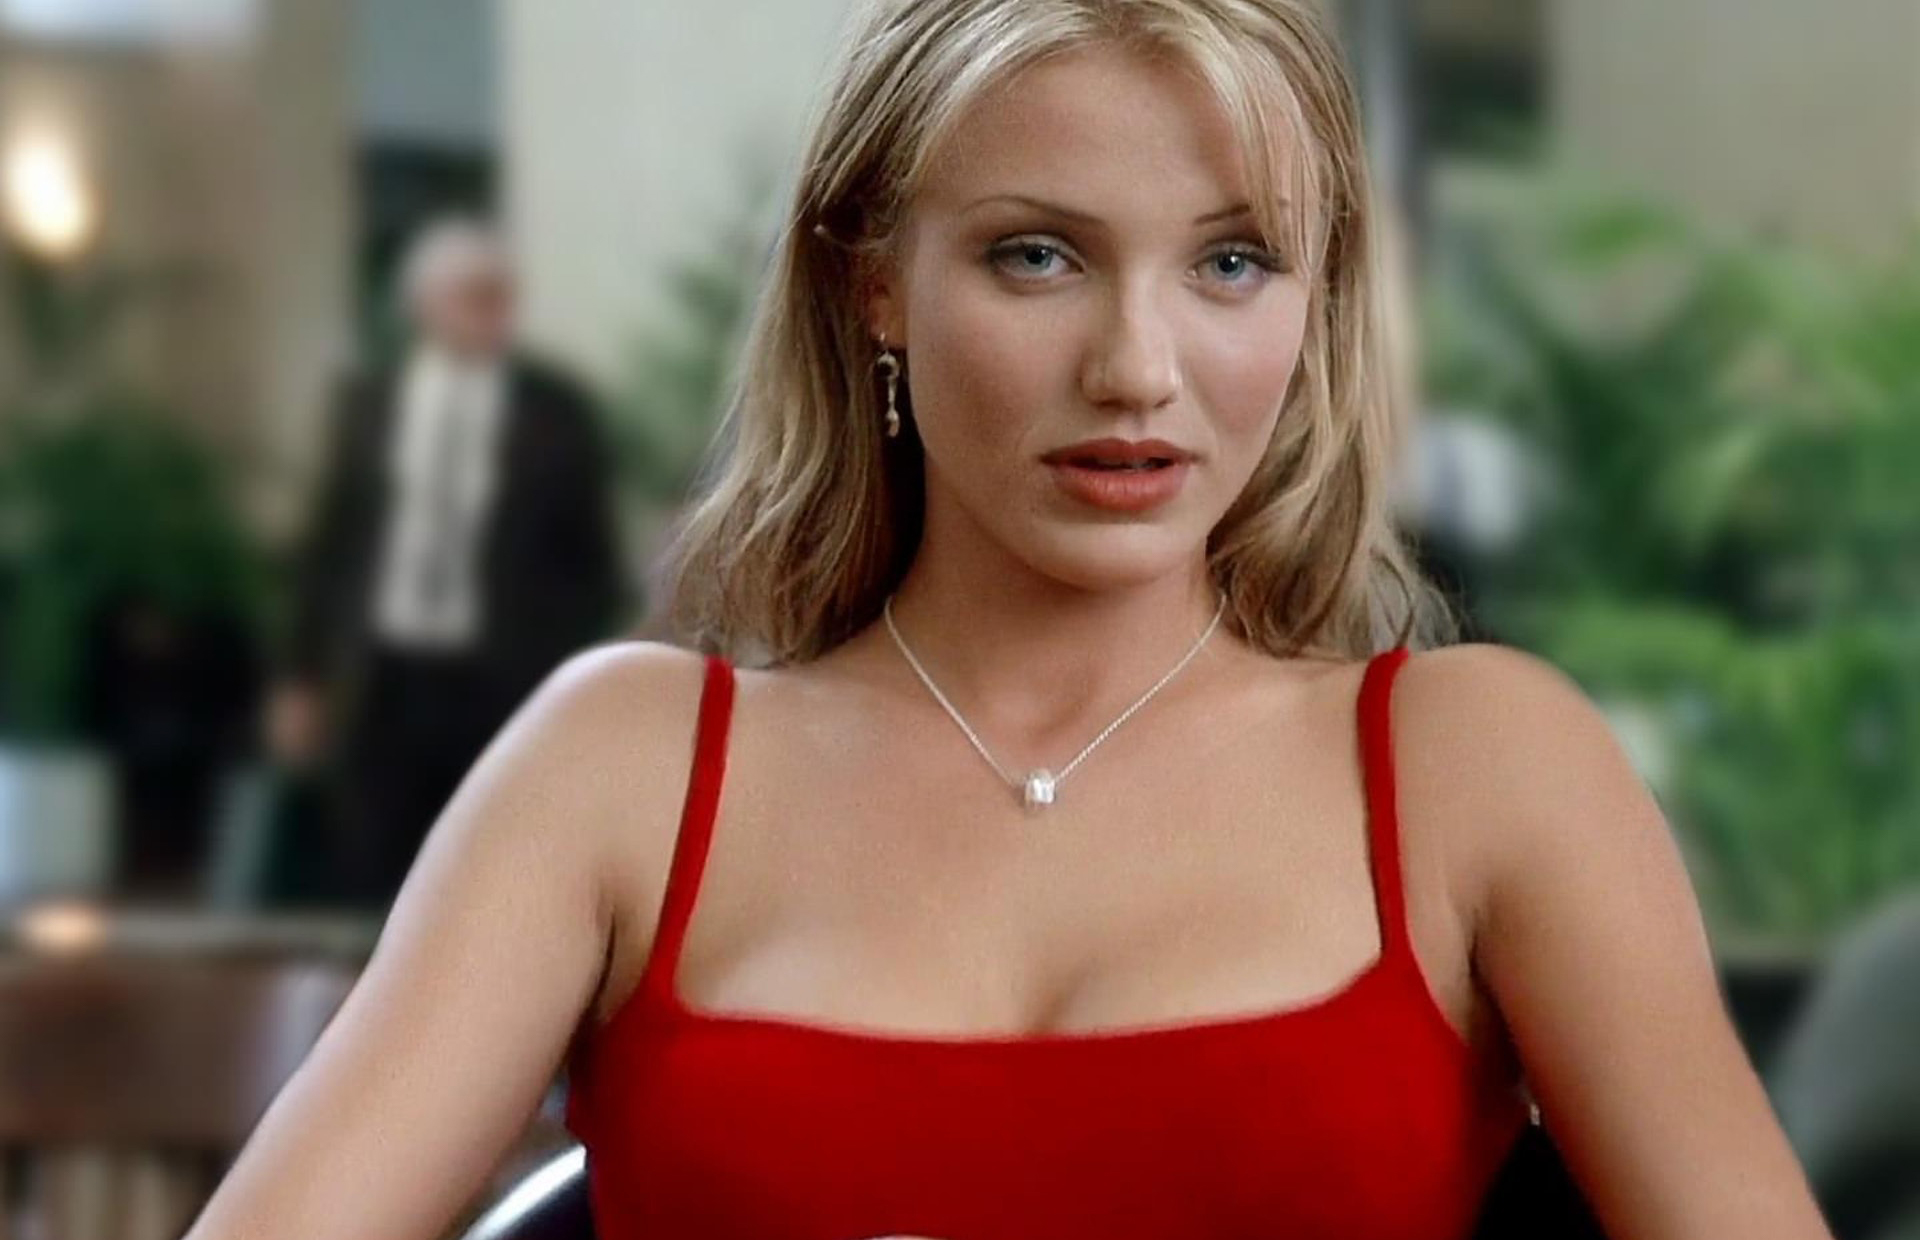 Cameron Diaz. She is a good actress but every time I see her in movies I will be like "They should have picked someone else for this."